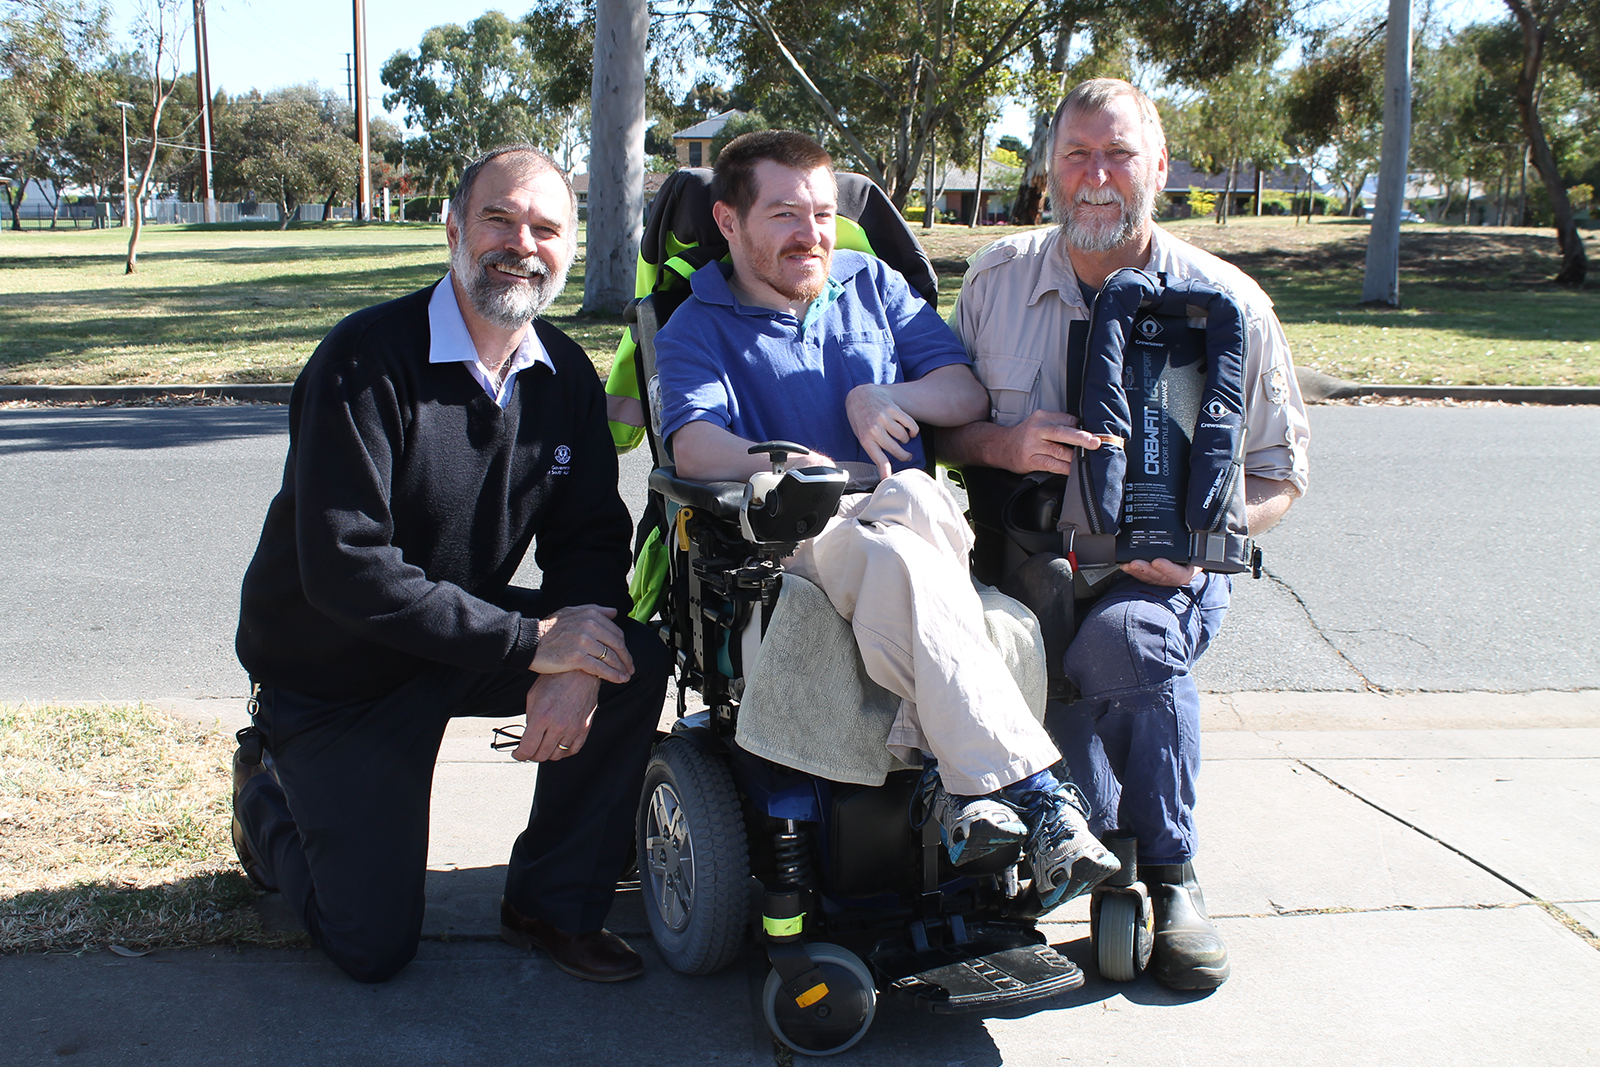 There are three men in the photo, all smiling. The man on the left is wearing a jumper with a government logo, the man in the centre is in an electric wheelchair and the man on the right is holding a lifejacket.